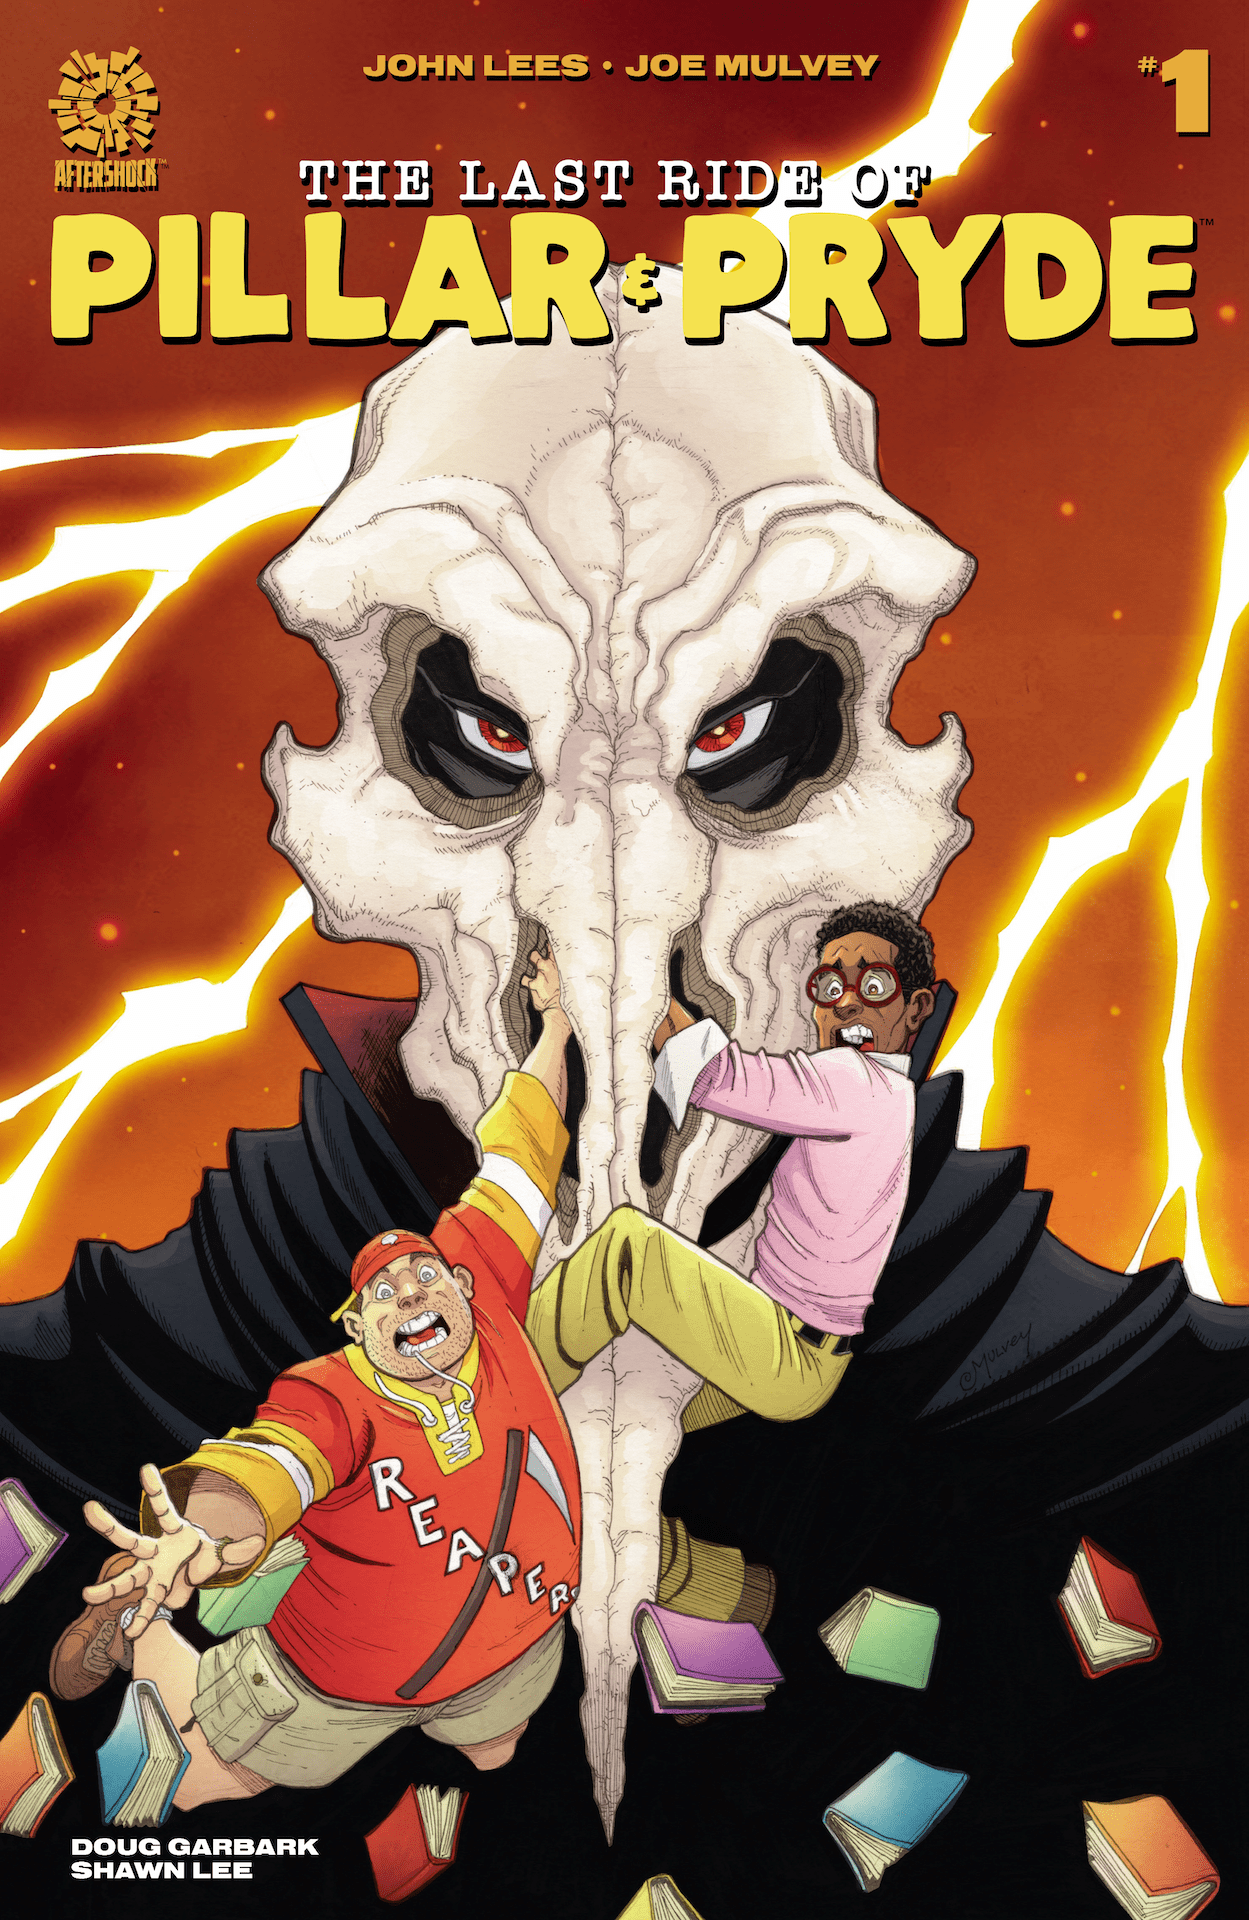 AfterShock Preview: The Last Ride of Pillar & Pryde #1